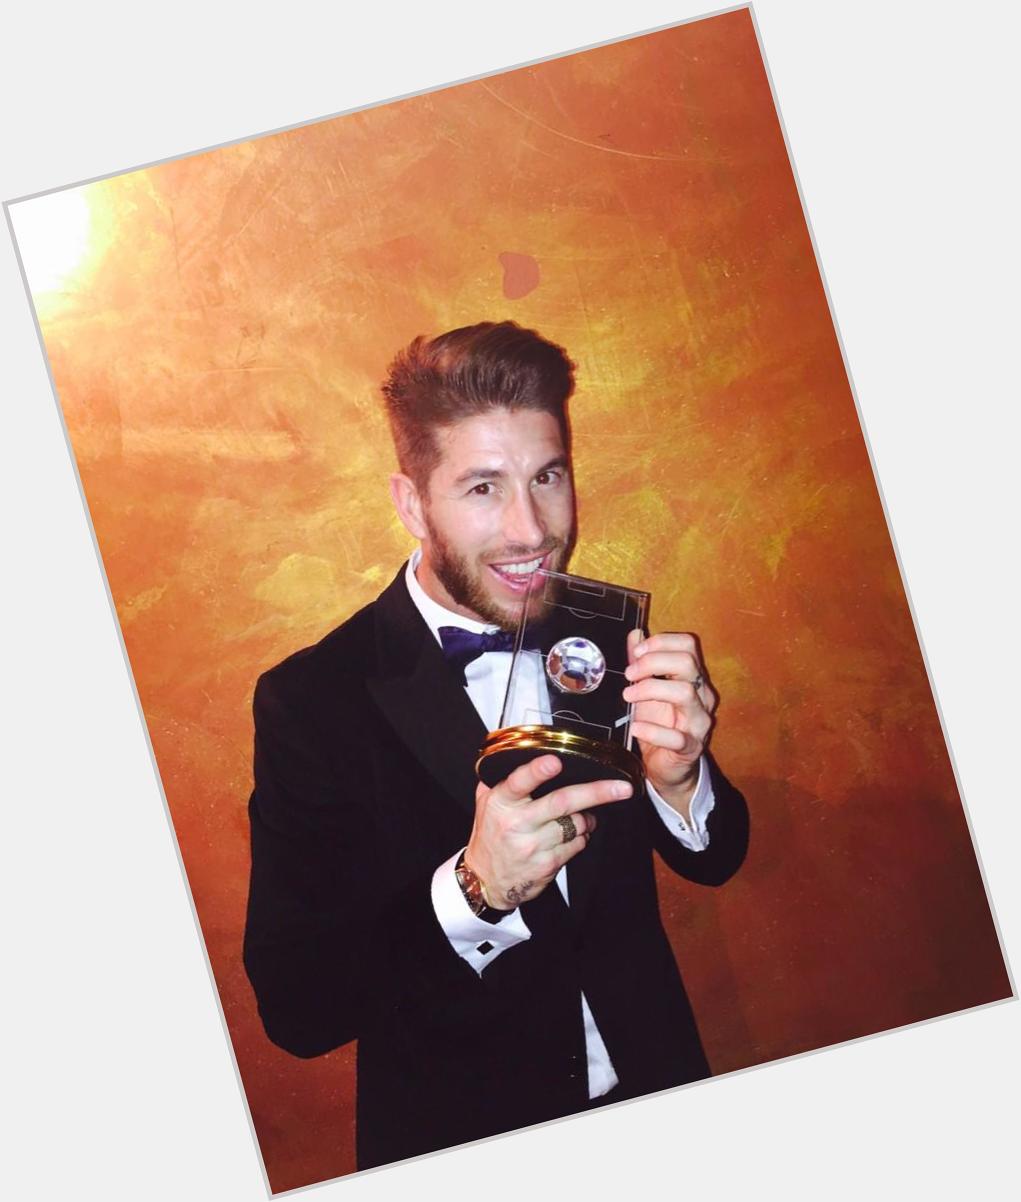 Happy birthday sergio ramos wish you all the best. We love you  